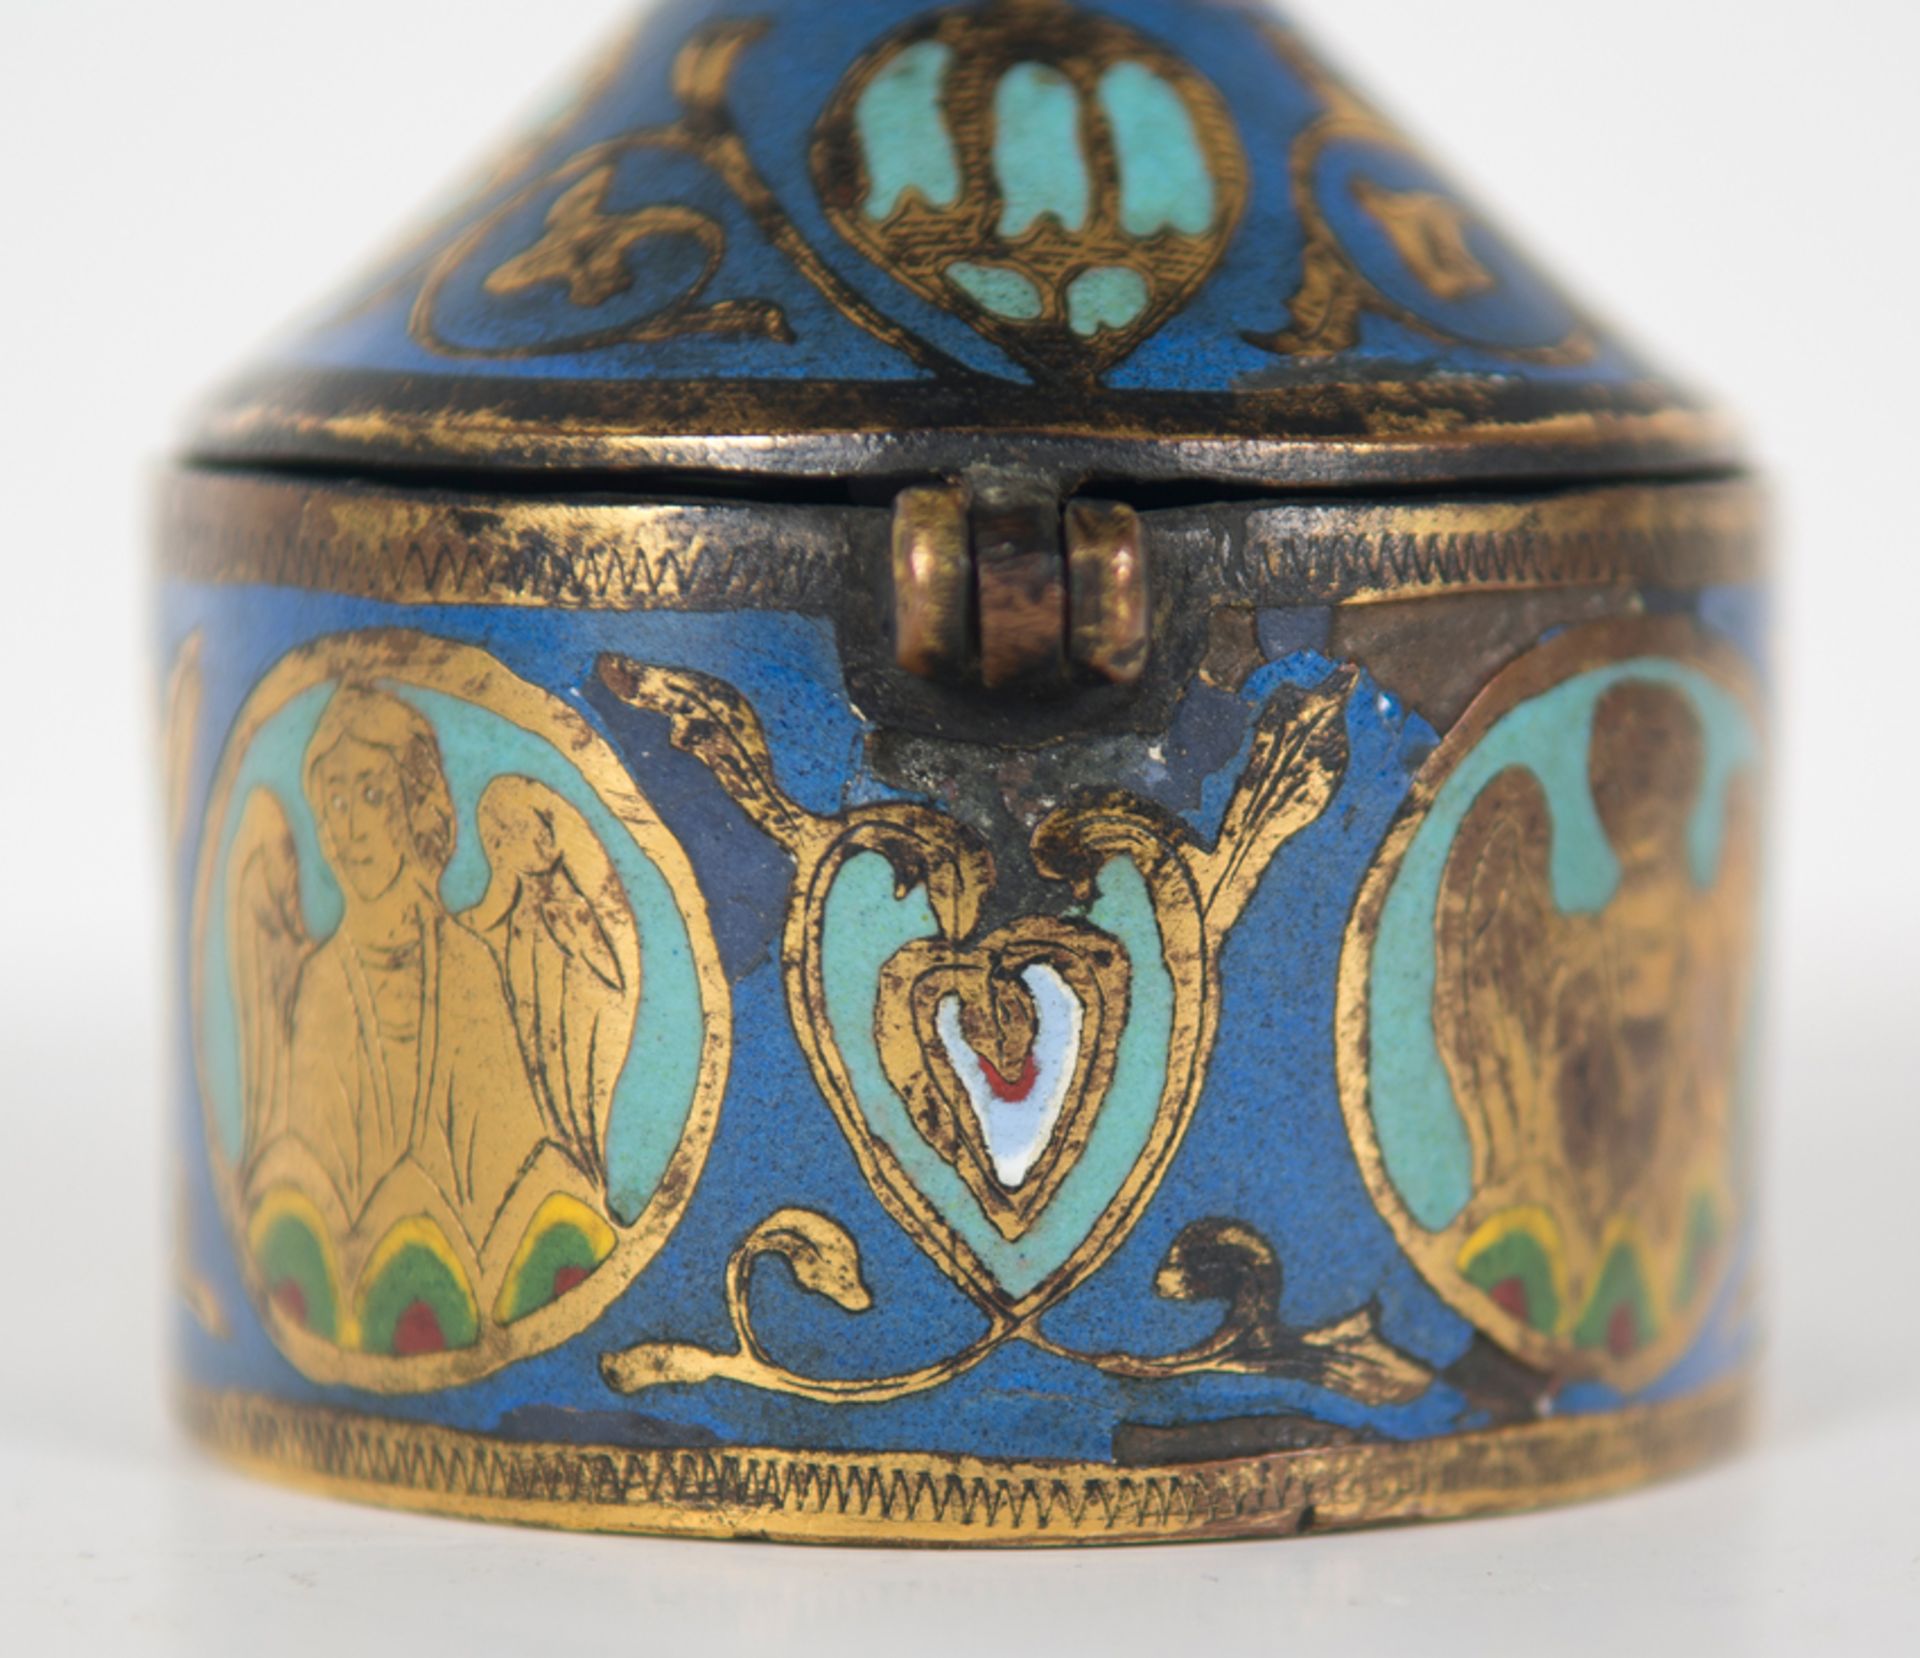 Copper gilt and engraved pyx, with champlev&eacute; enamel. Limoges. France. Romanesque. 13th centur - Image 8 of 16